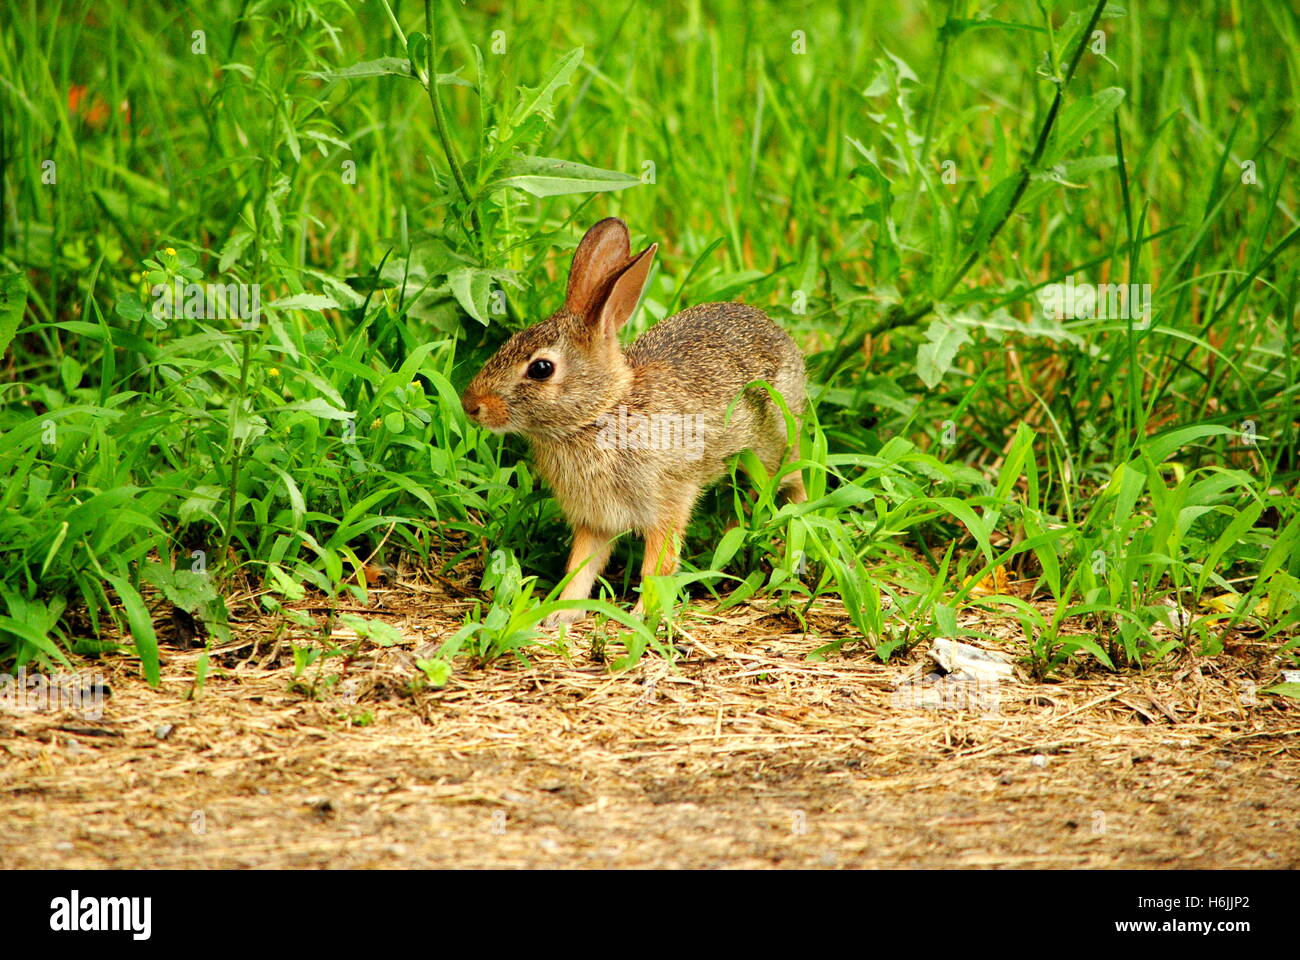 Young Rabbit foraging in the grass Stock Photo